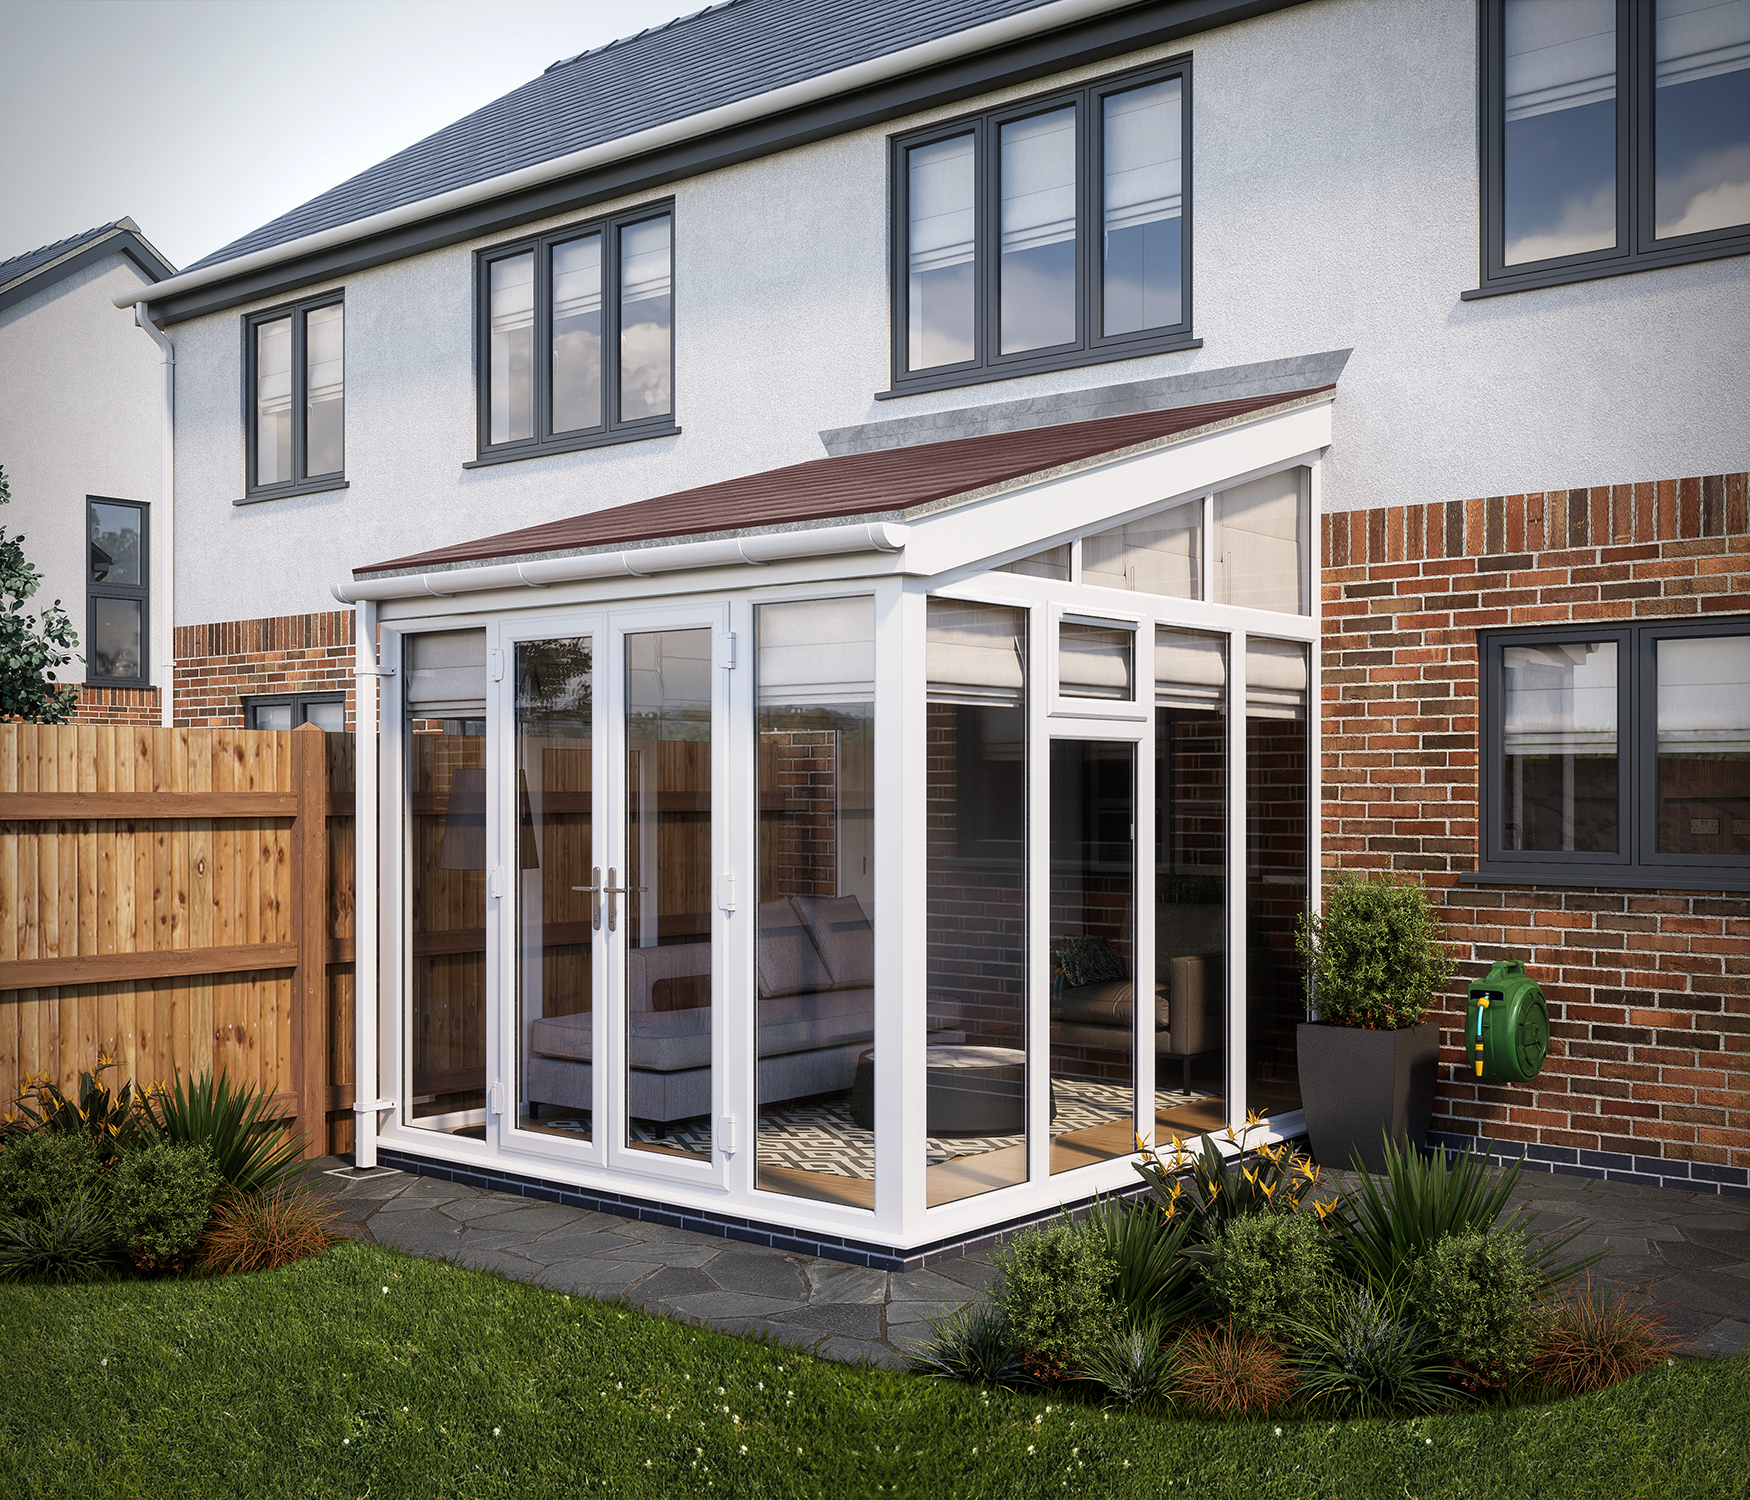 Image of SOLid Roof Full Height Lean to Conservatory White Frames with Rustic Brown Tiles - 13 x 10ft